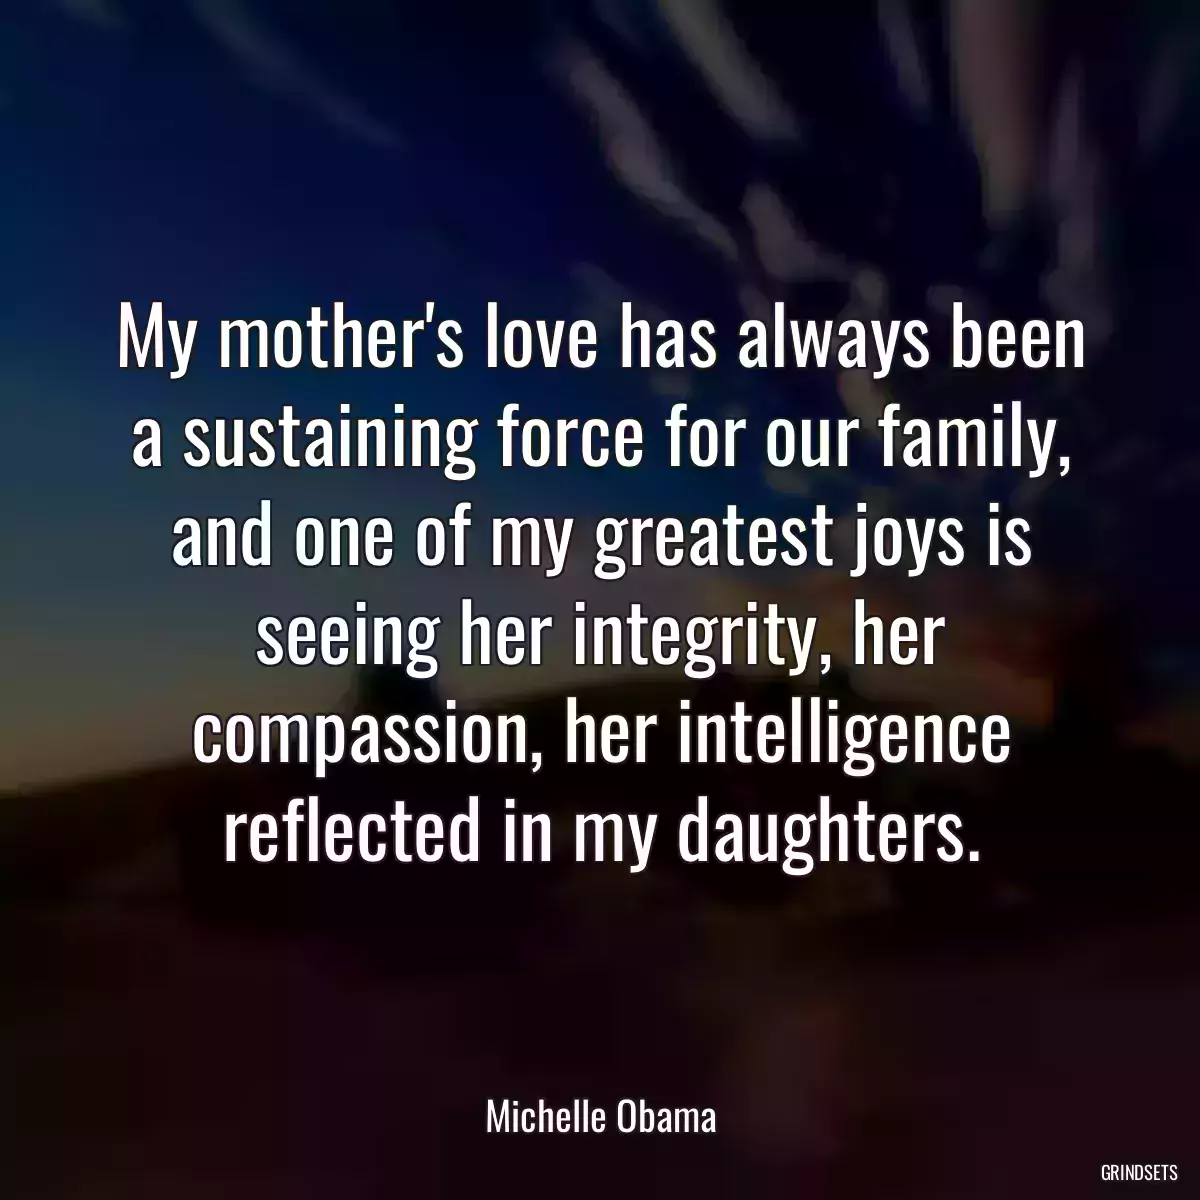 My mother\'s love has always been a sustaining force for our family, and one of my greatest joys is seeing her integrity, her compassion, her intelligence reflected in my daughters.